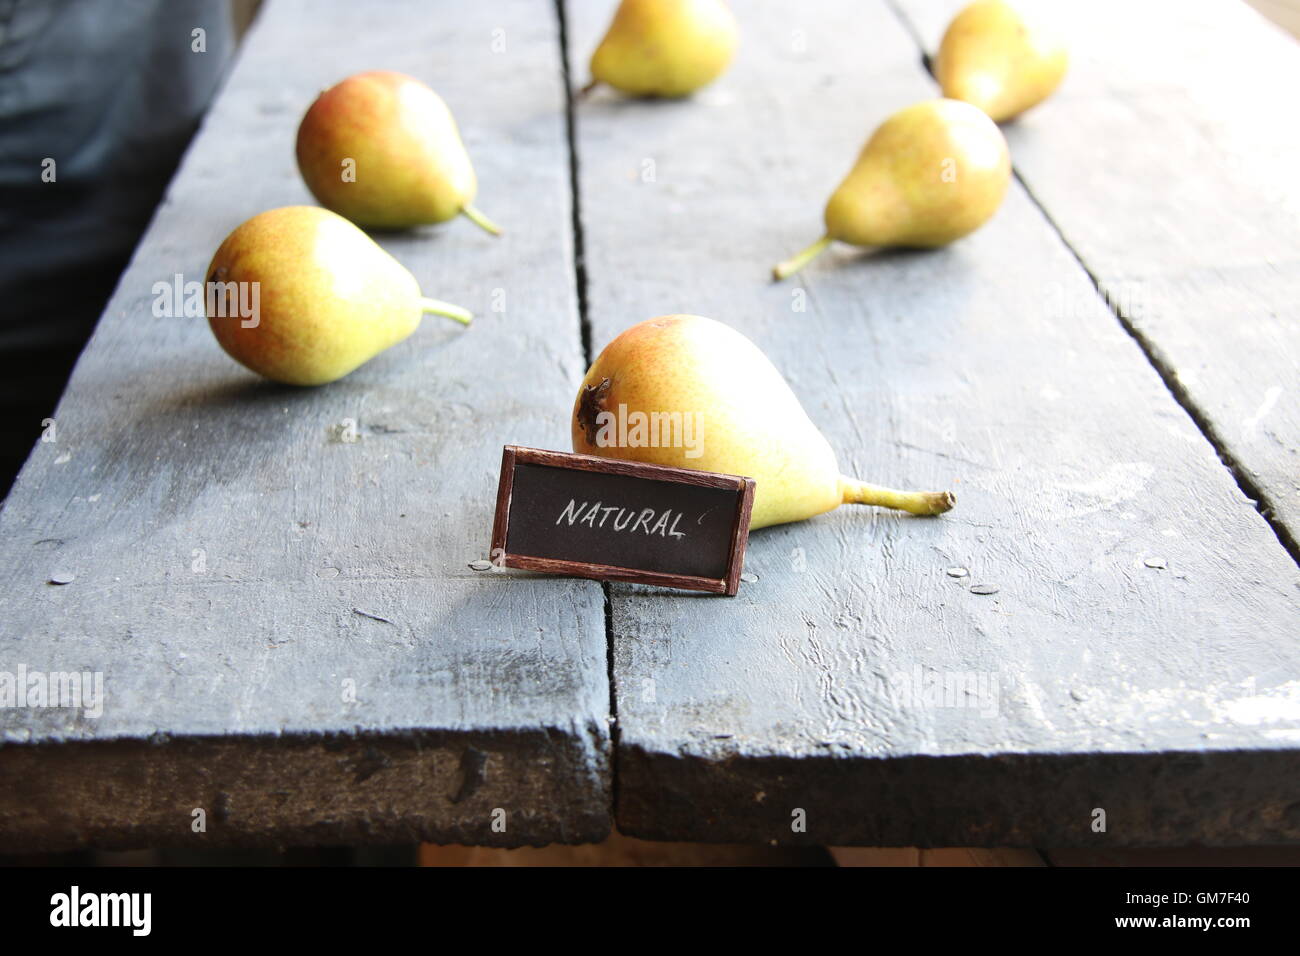 Juicy flavorful pears and text natural Stock Photo